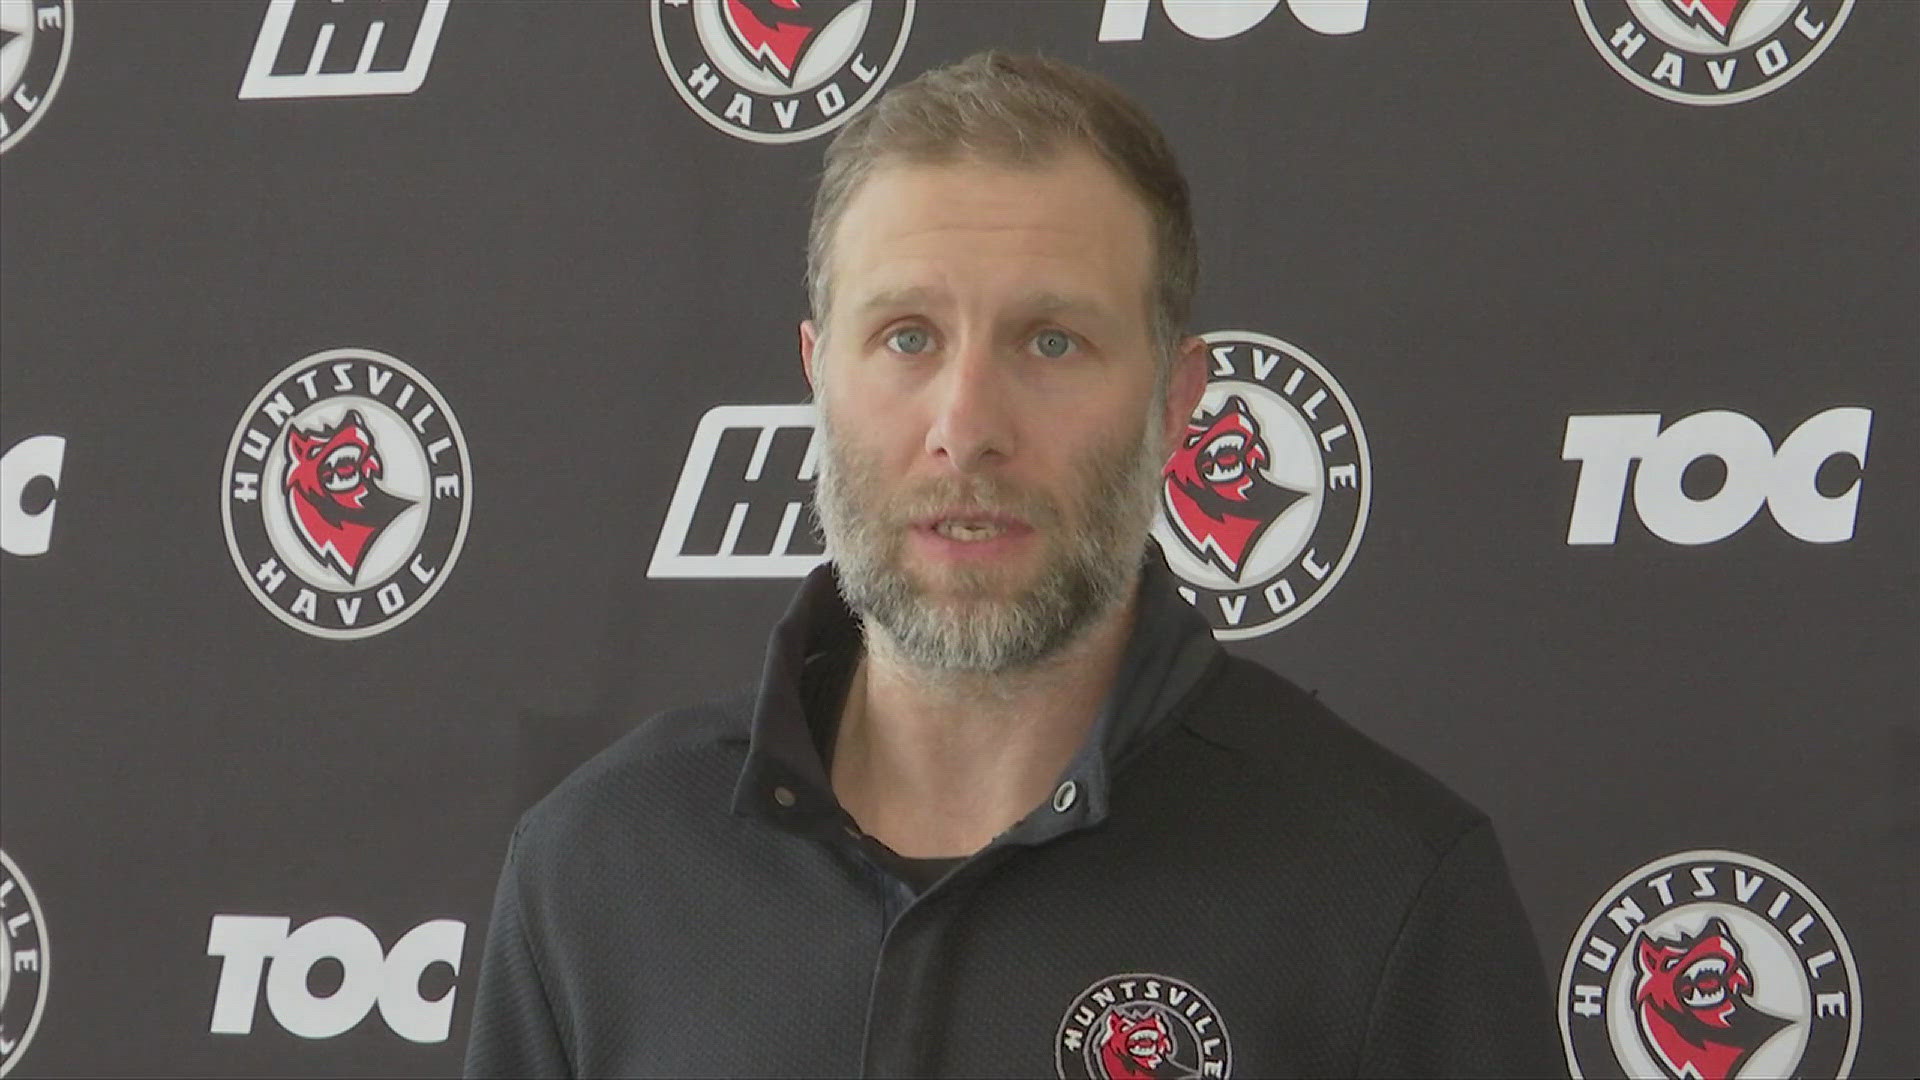 The Huntsville Havoc are two wins away from capturing another SPHL President's Cup! Nick Kuzma has preview of the matchup